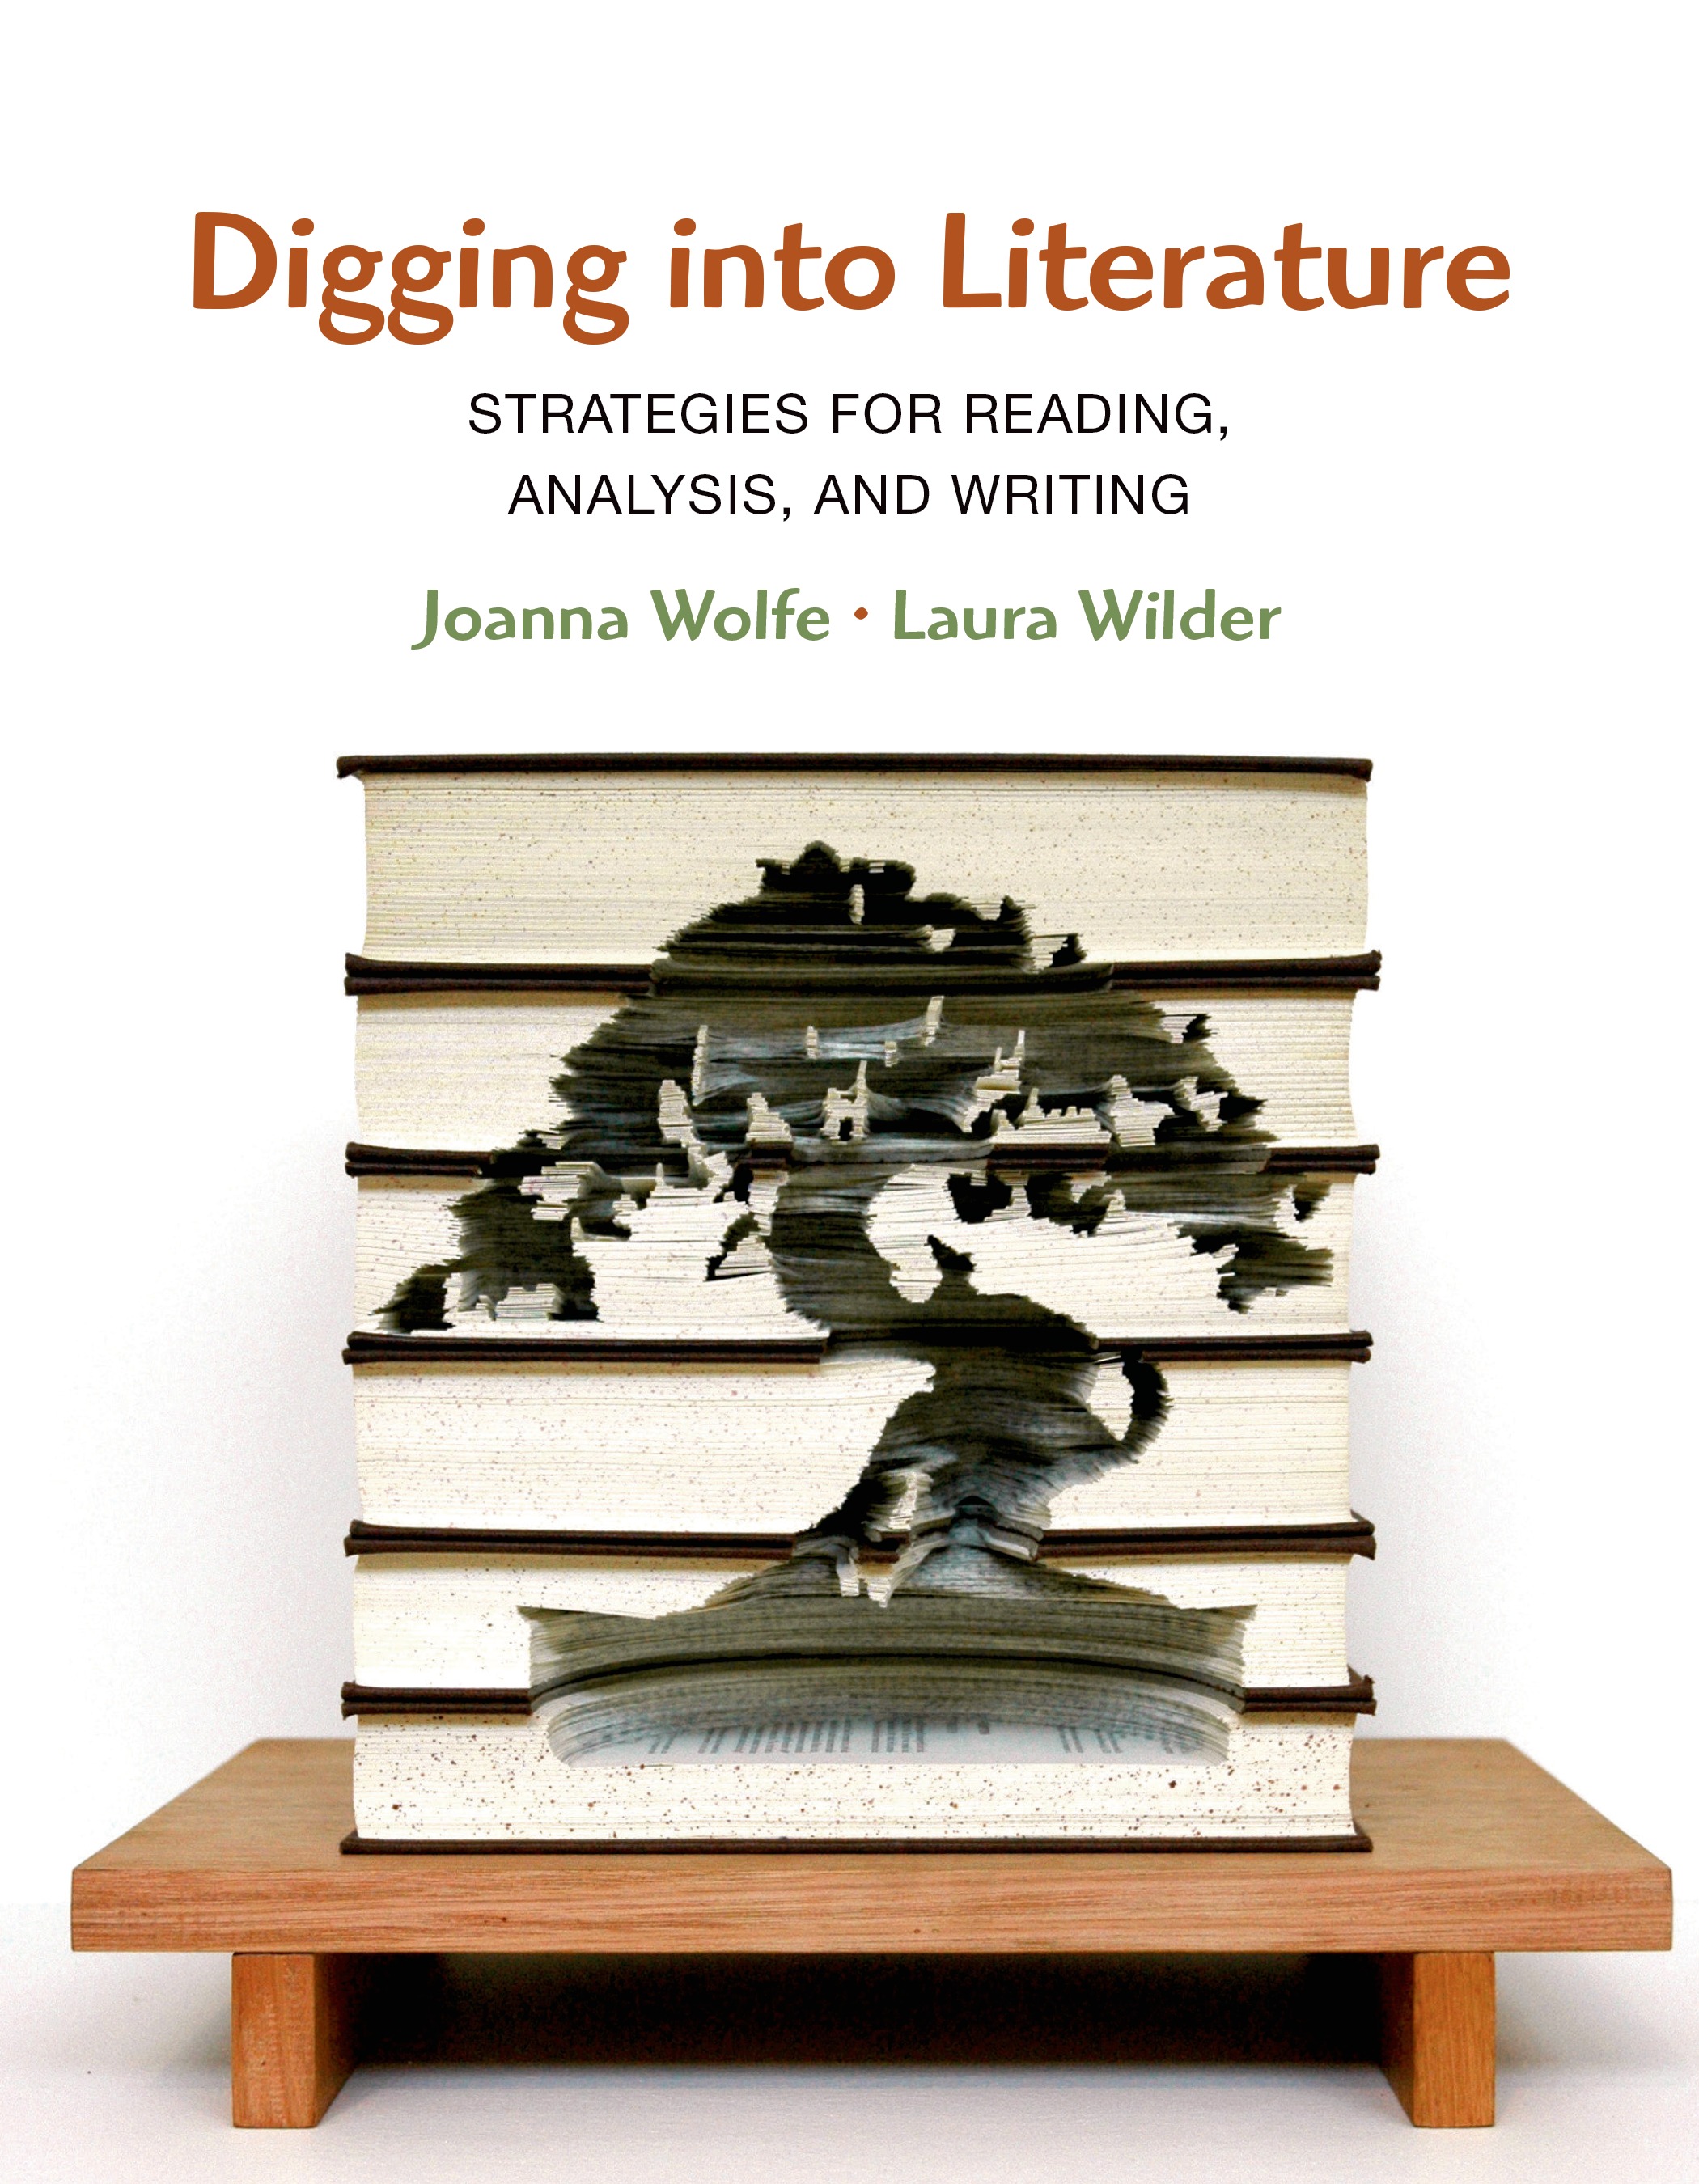 digging into literature was co-authored by joanna wolfe